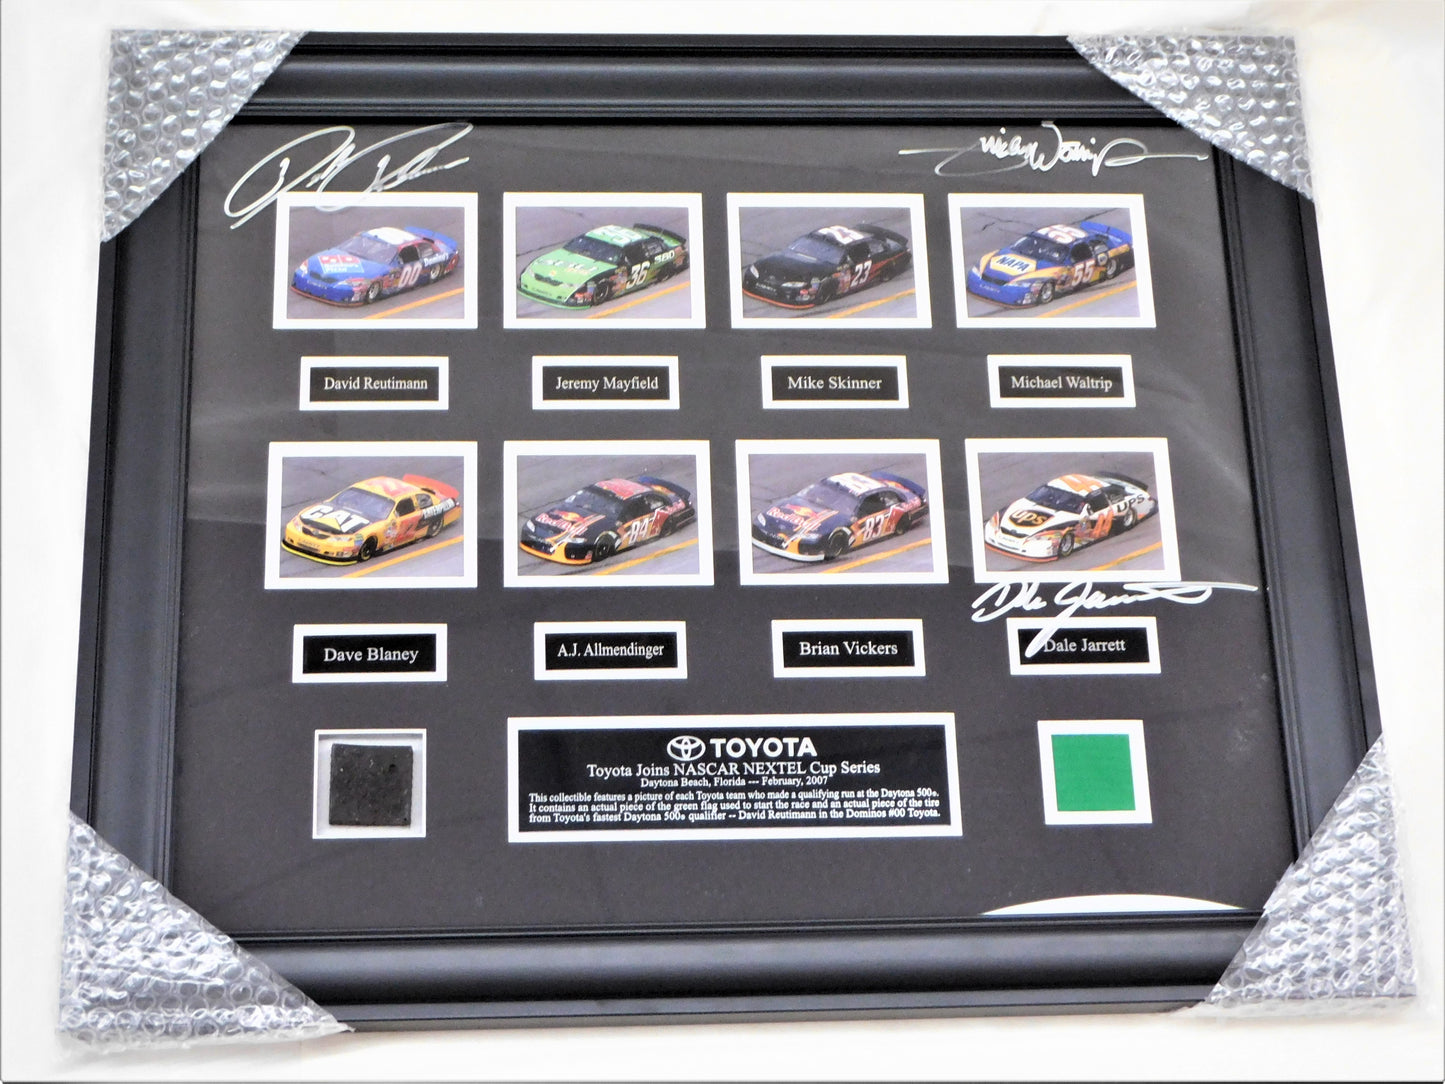 2007 Toyota Joins NASCAR Cup Series Commemorative Frame